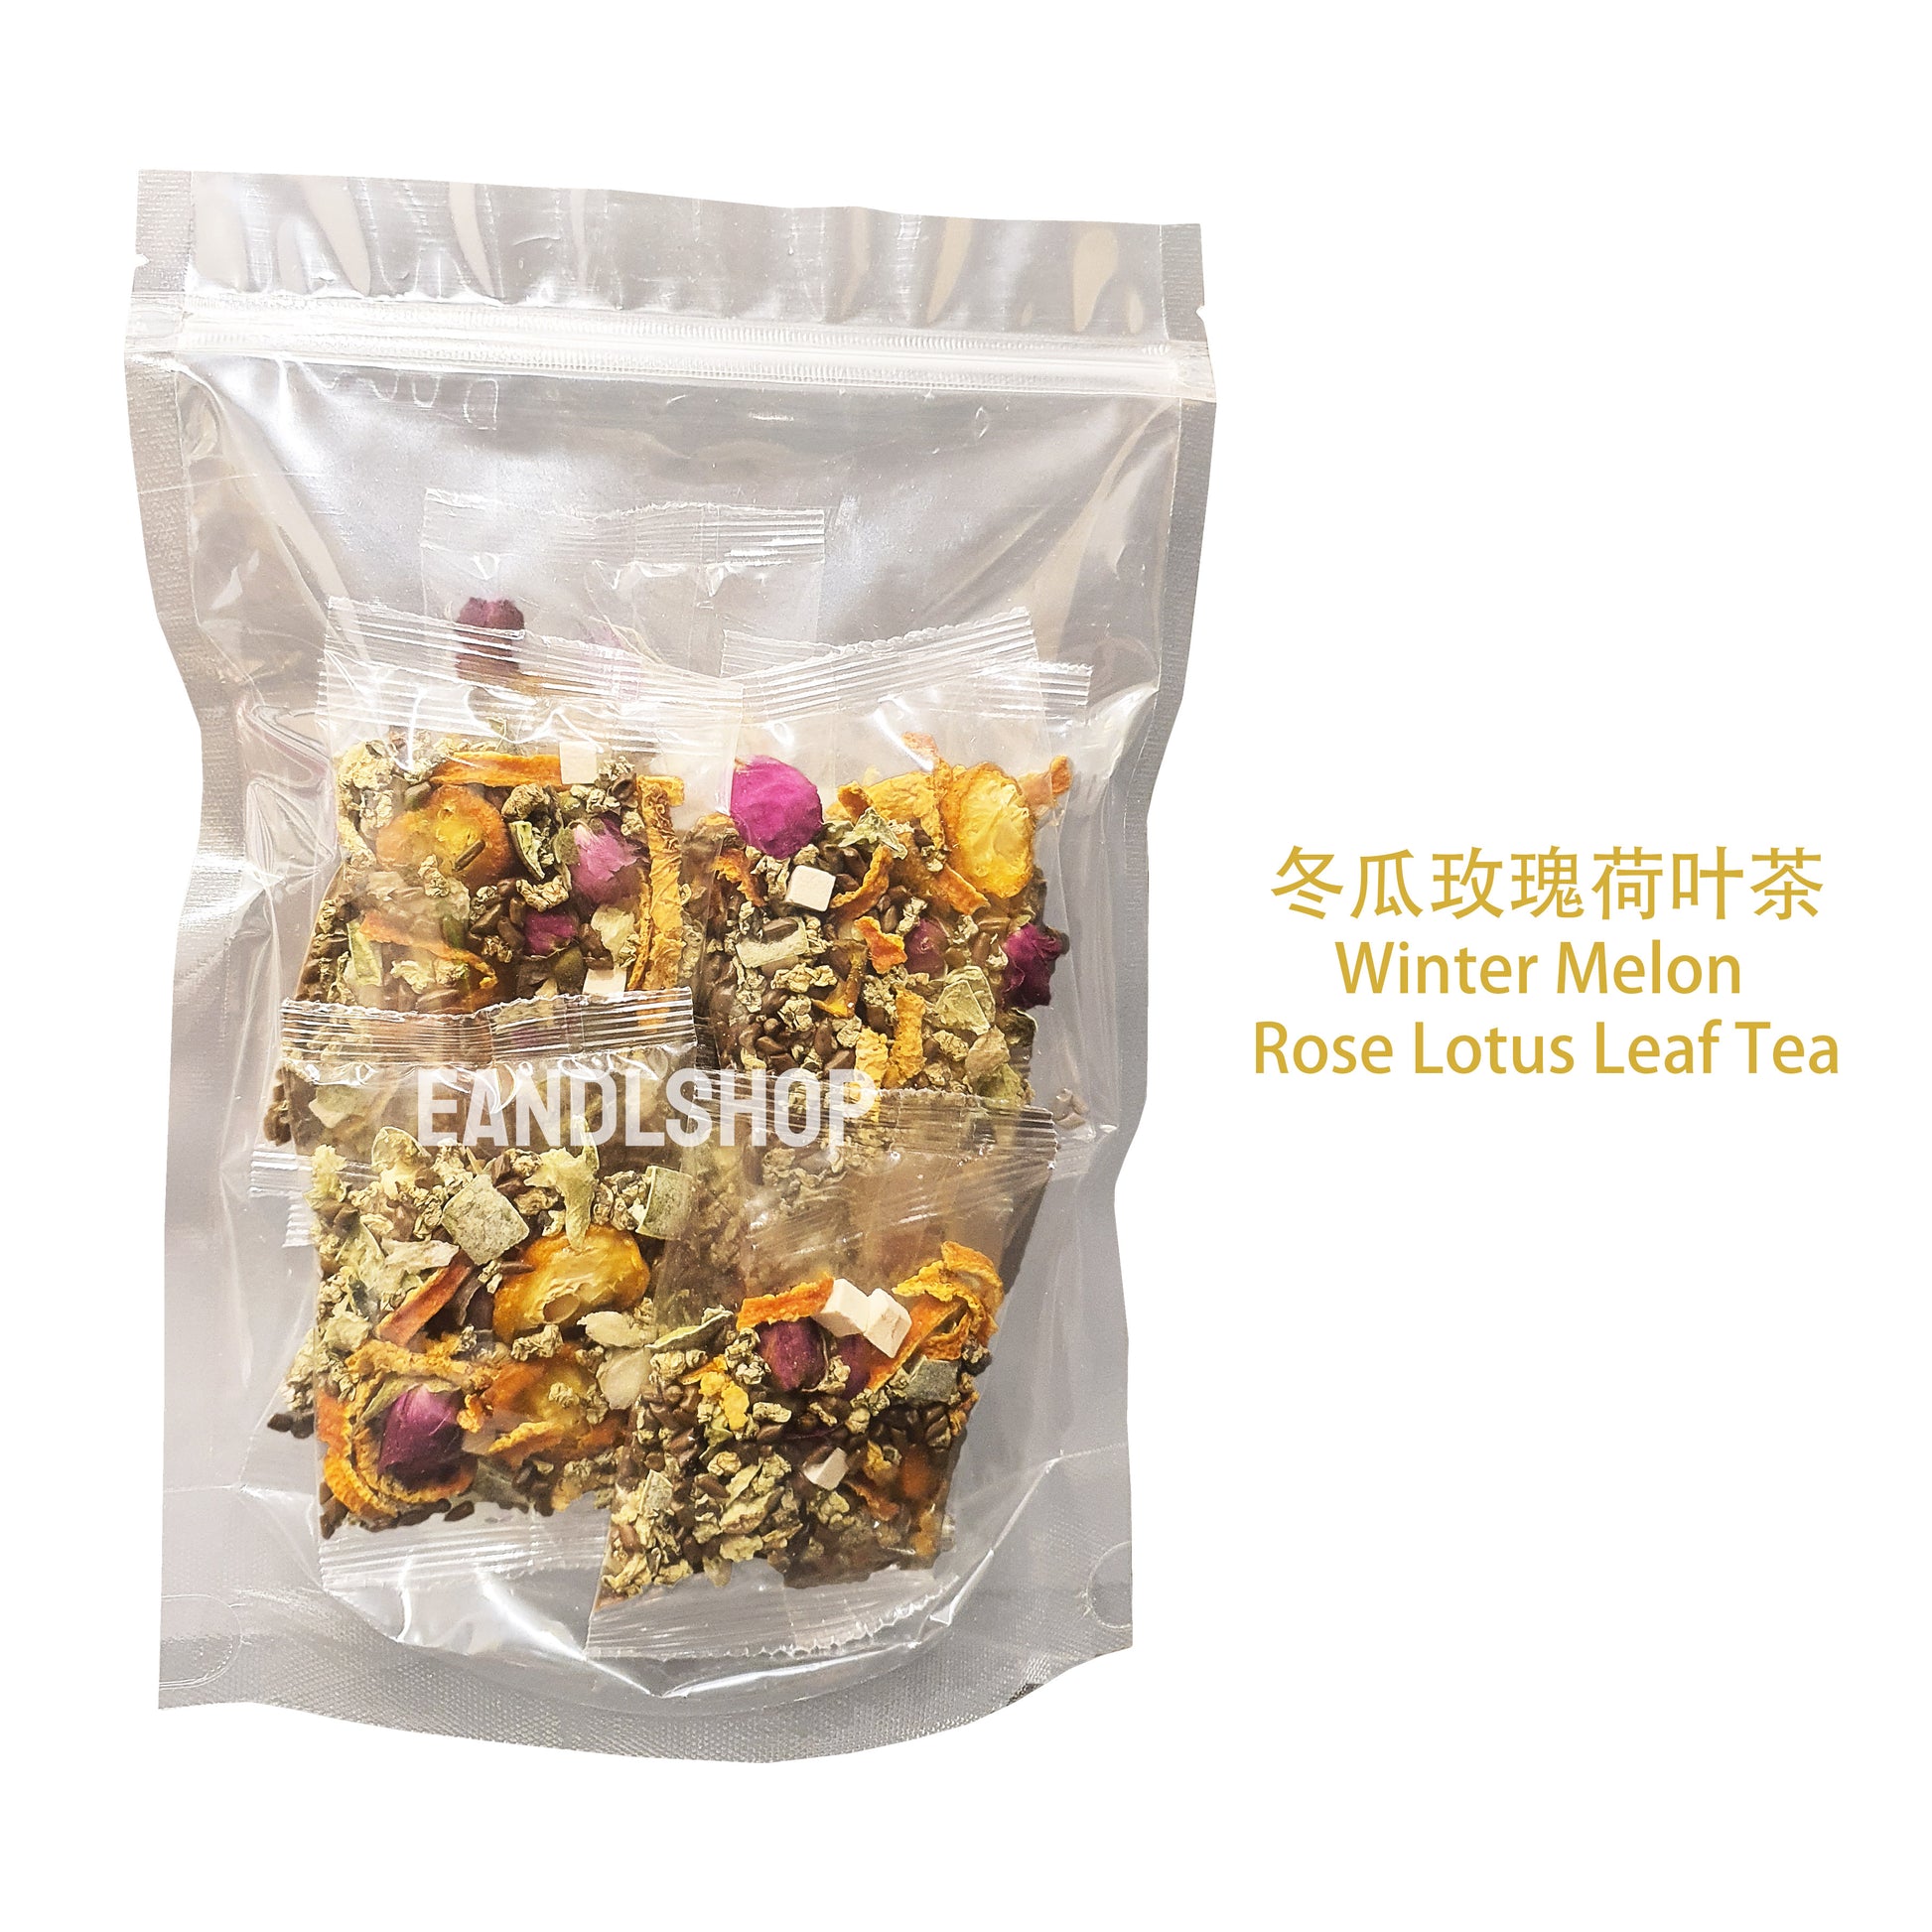 Winter Melon Rose Lotus Tea.Old-school biscuits, modern snacks (chips, crackers), cakes, gummies, plums, dried fruits, nuts, herbal tea – available at www.EANDLSHOP.com